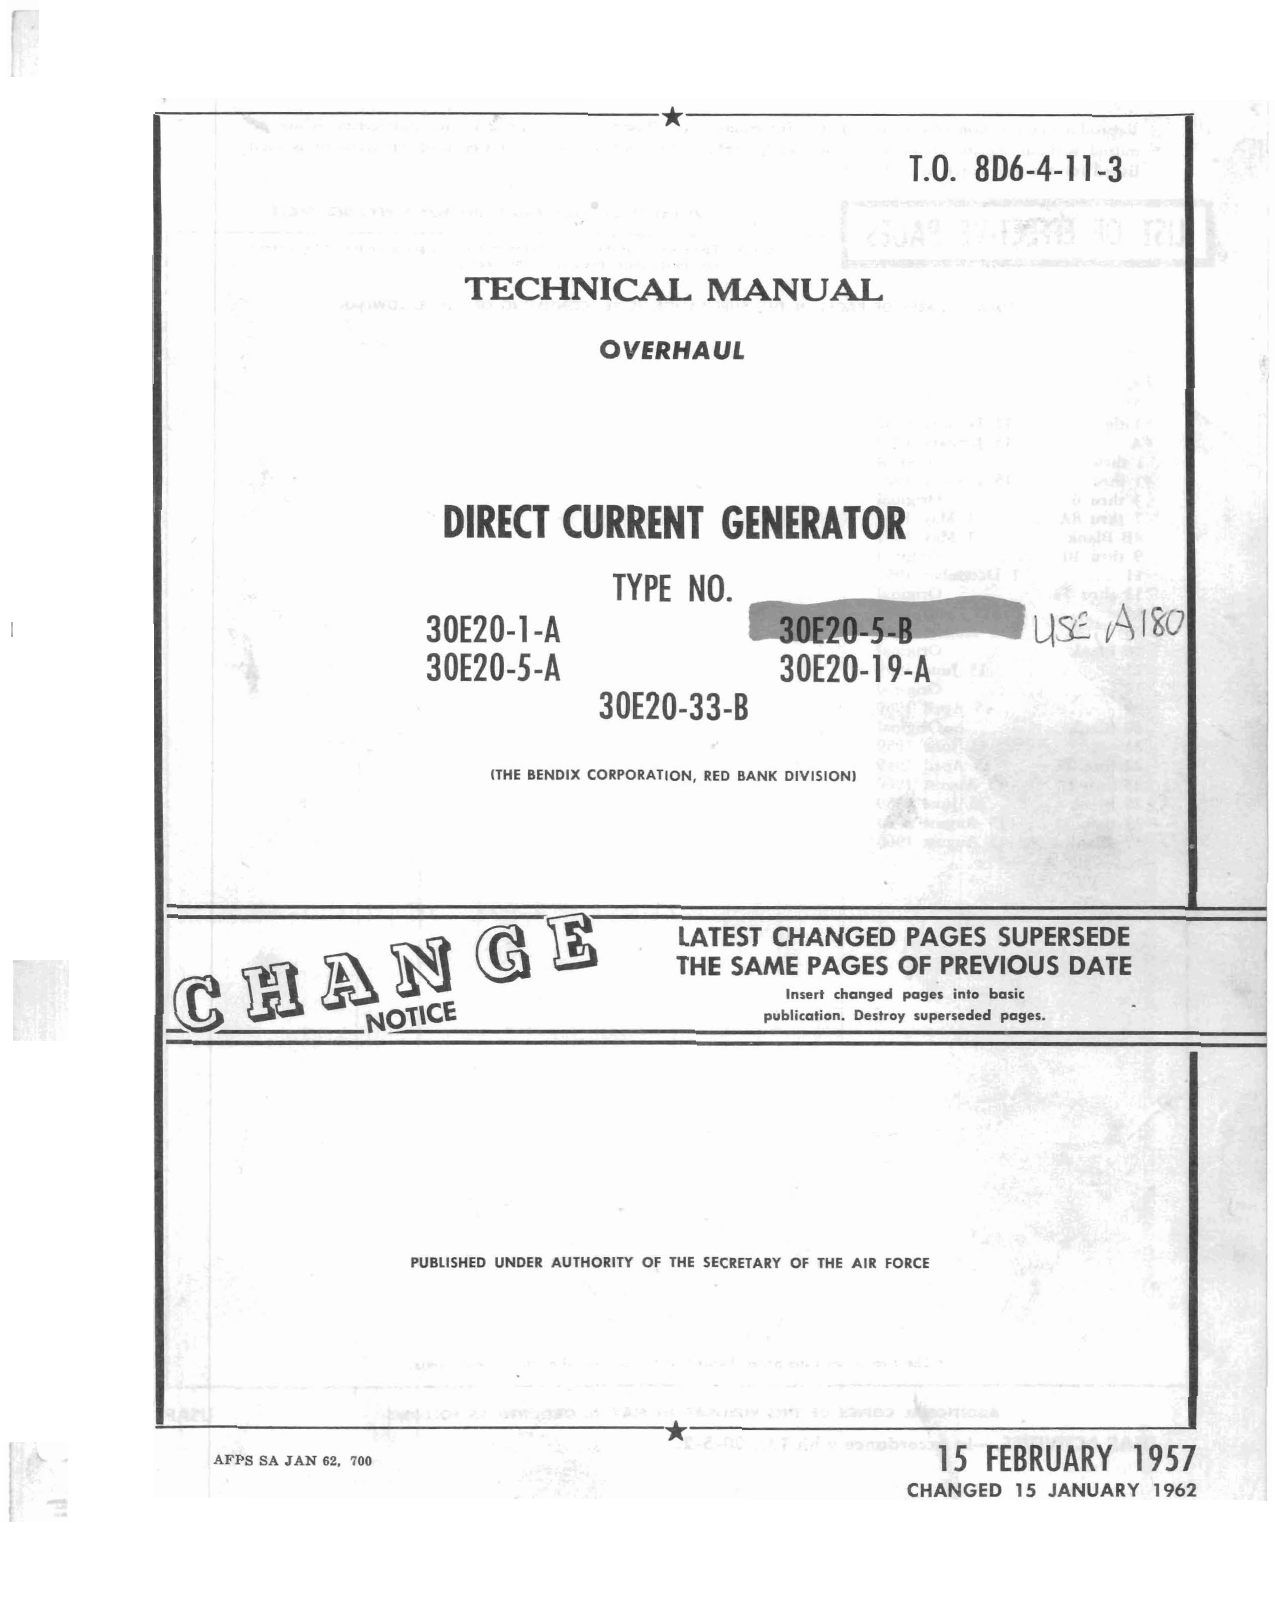 Sample page 1 from AirCorps Library document: Overhaul for Direct Current Generator - Types 30E20-1-A, 30E20-5-A, 30E20-5-B, 30E20-19-A, and 30E20-33-B 